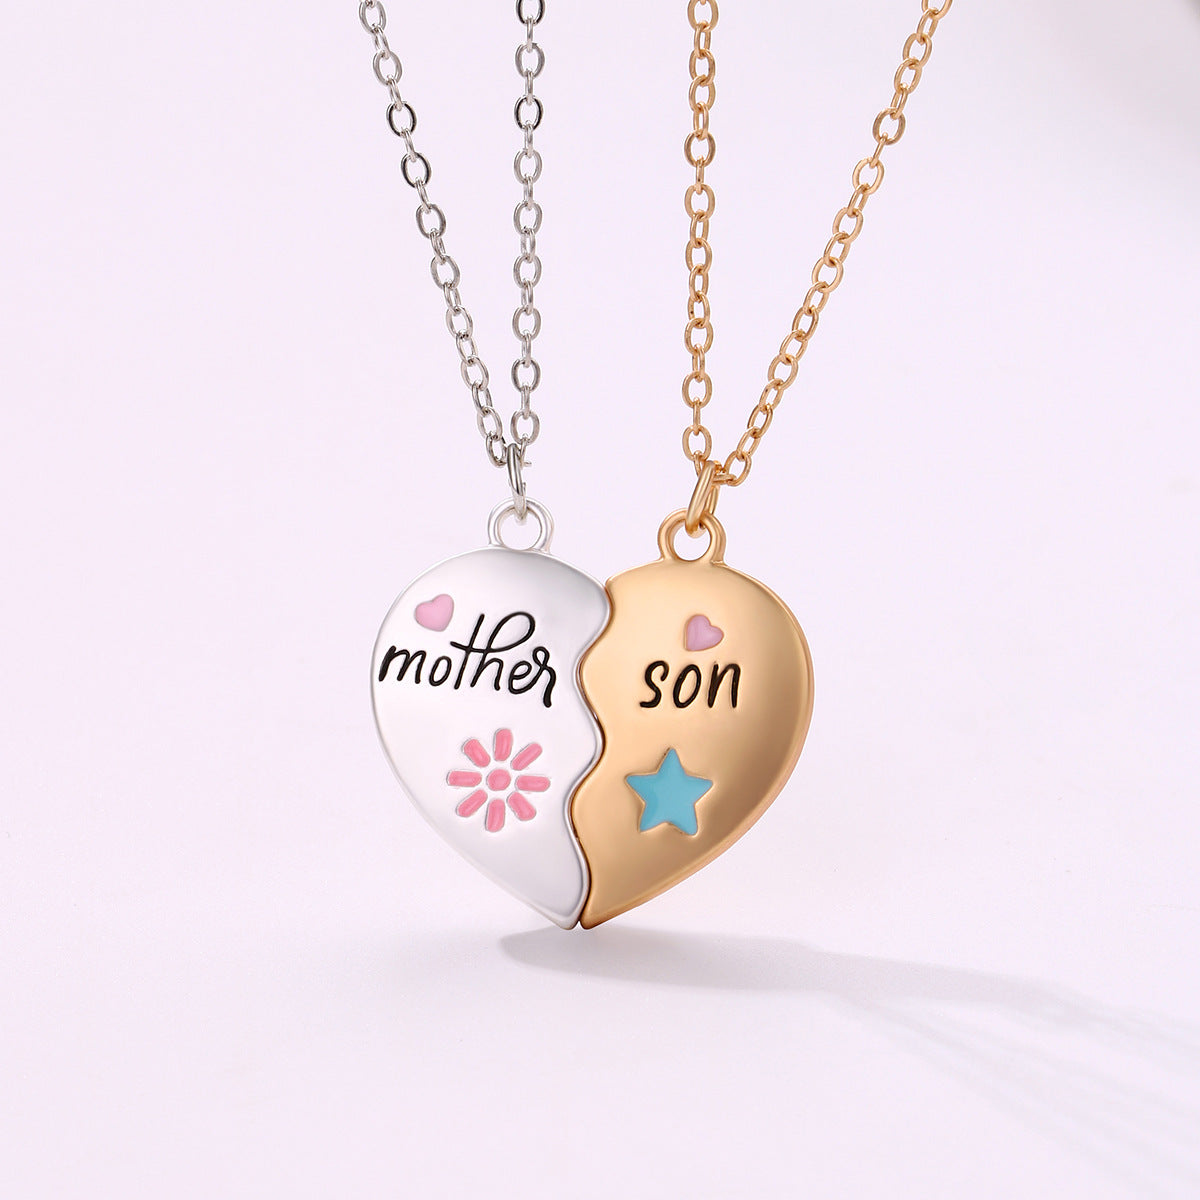 Mother/Son 2 Necklace Set with Gift Boxes